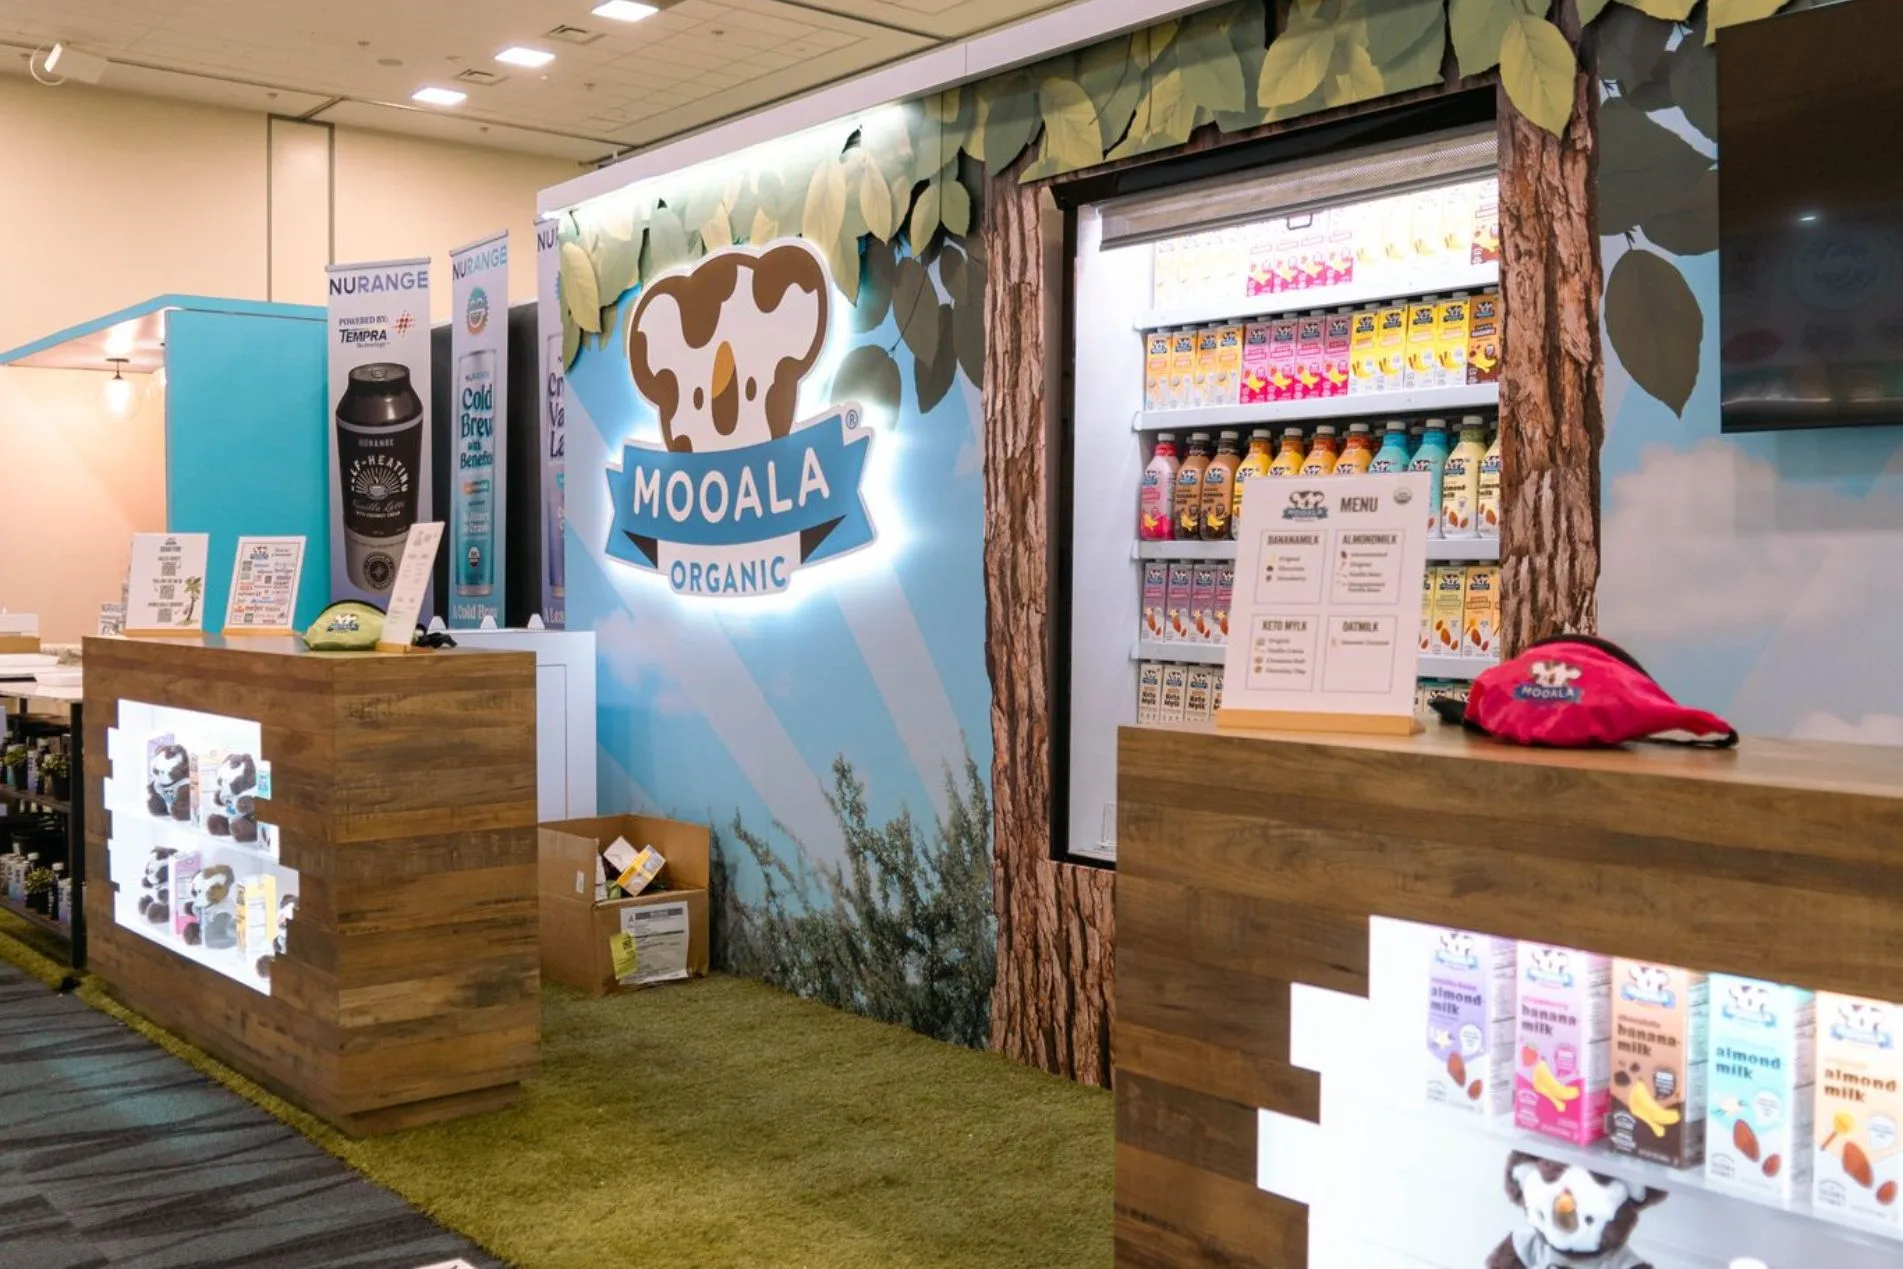 5 Alternative Uses for Trade Show Displays